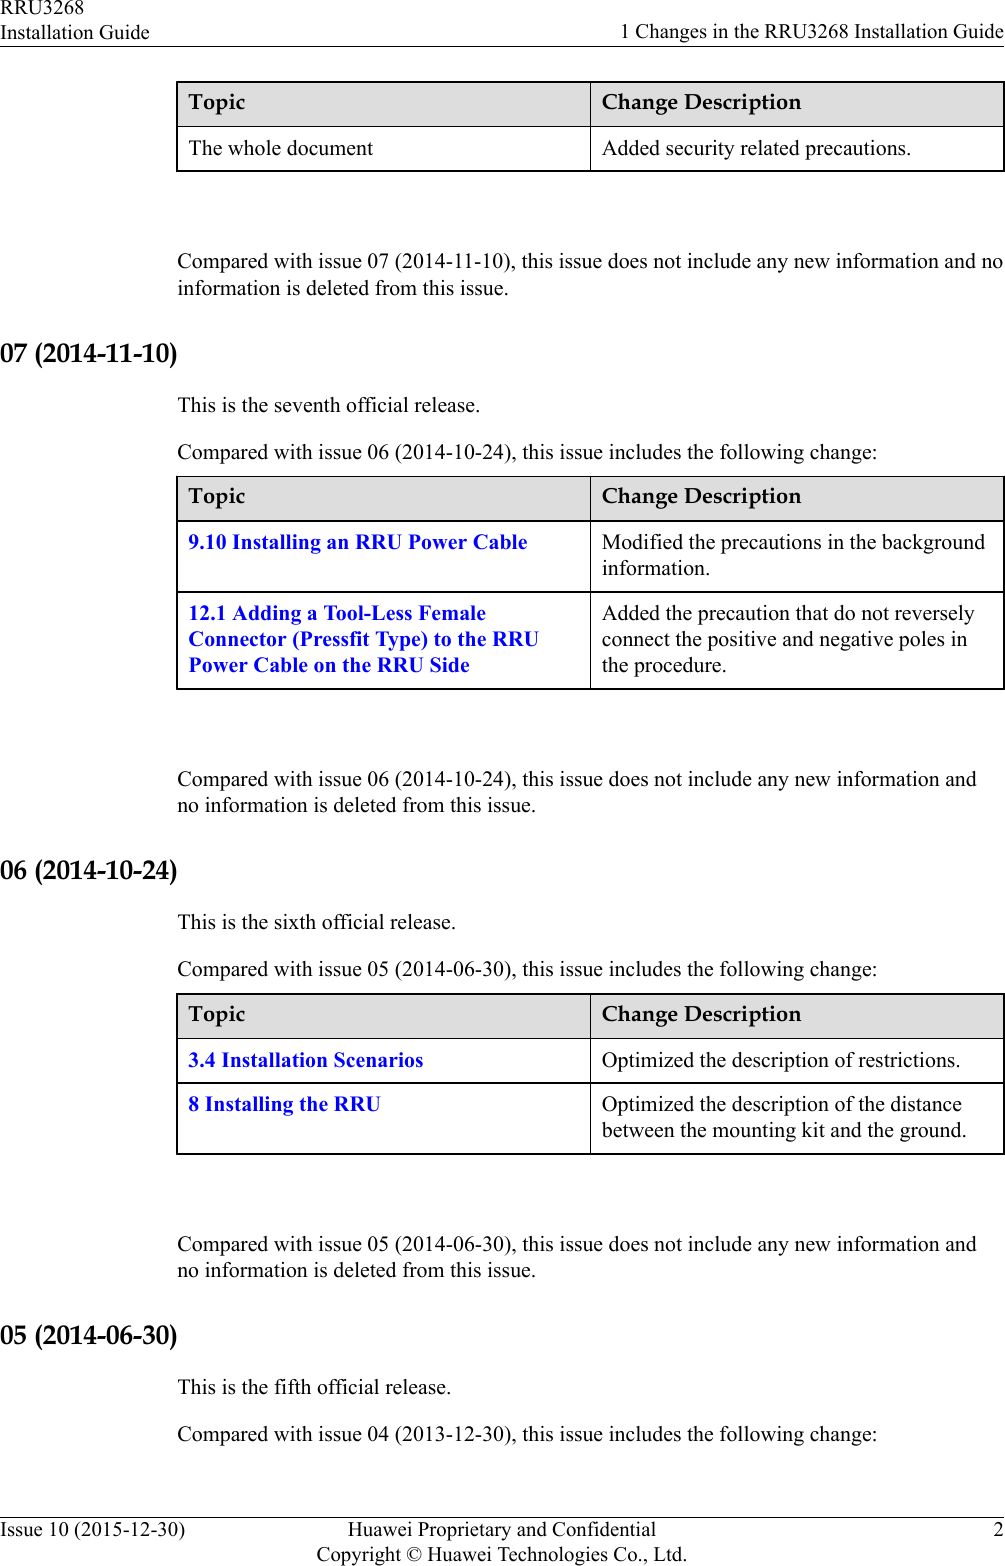 Topic Change DescriptionThe whole document Added security related precautions. Compared with issue 07 (2014-11-10), this issue does not include any new information and noinformation is deleted from this issue.07 (2014-11-10)This is the seventh official release.Compared with issue 06 (2014-10-24), this issue includes the following change:Topic Change Description9.10 Installing an RRU Power Cable Modified the precautions in the backgroundinformation.12.1 Adding a Tool-Less FemaleConnector (Pressfit Type) to the RRUPower Cable on the RRU SideAdded the precaution that do not reverselyconnect the positive and negative poles inthe procedure. Compared with issue 06 (2014-10-24), this issue does not include any new information andno information is deleted from this issue.06 (2014-10-24)This is the sixth official release.Compared with issue 05 (2014-06-30), this issue includes the following change:Topic Change Description3.4 Installation Scenarios Optimized the description of restrictions.8 Installing the RRU Optimized the description of the distancebetween the mounting kit and the ground. Compared with issue 05 (2014-06-30), this issue does not include any new information andno information is deleted from this issue.05 (2014-06-30)This is the fifth official release.Compared with issue 04 (2013-12-30), this issue includes the following change:RRU3268Installation Guide 1 Changes in the RRU3268 Installation GuideIssue 10 (2015-12-30) Huawei Proprietary and ConfidentialCopyright © Huawei Technologies Co., Ltd.2